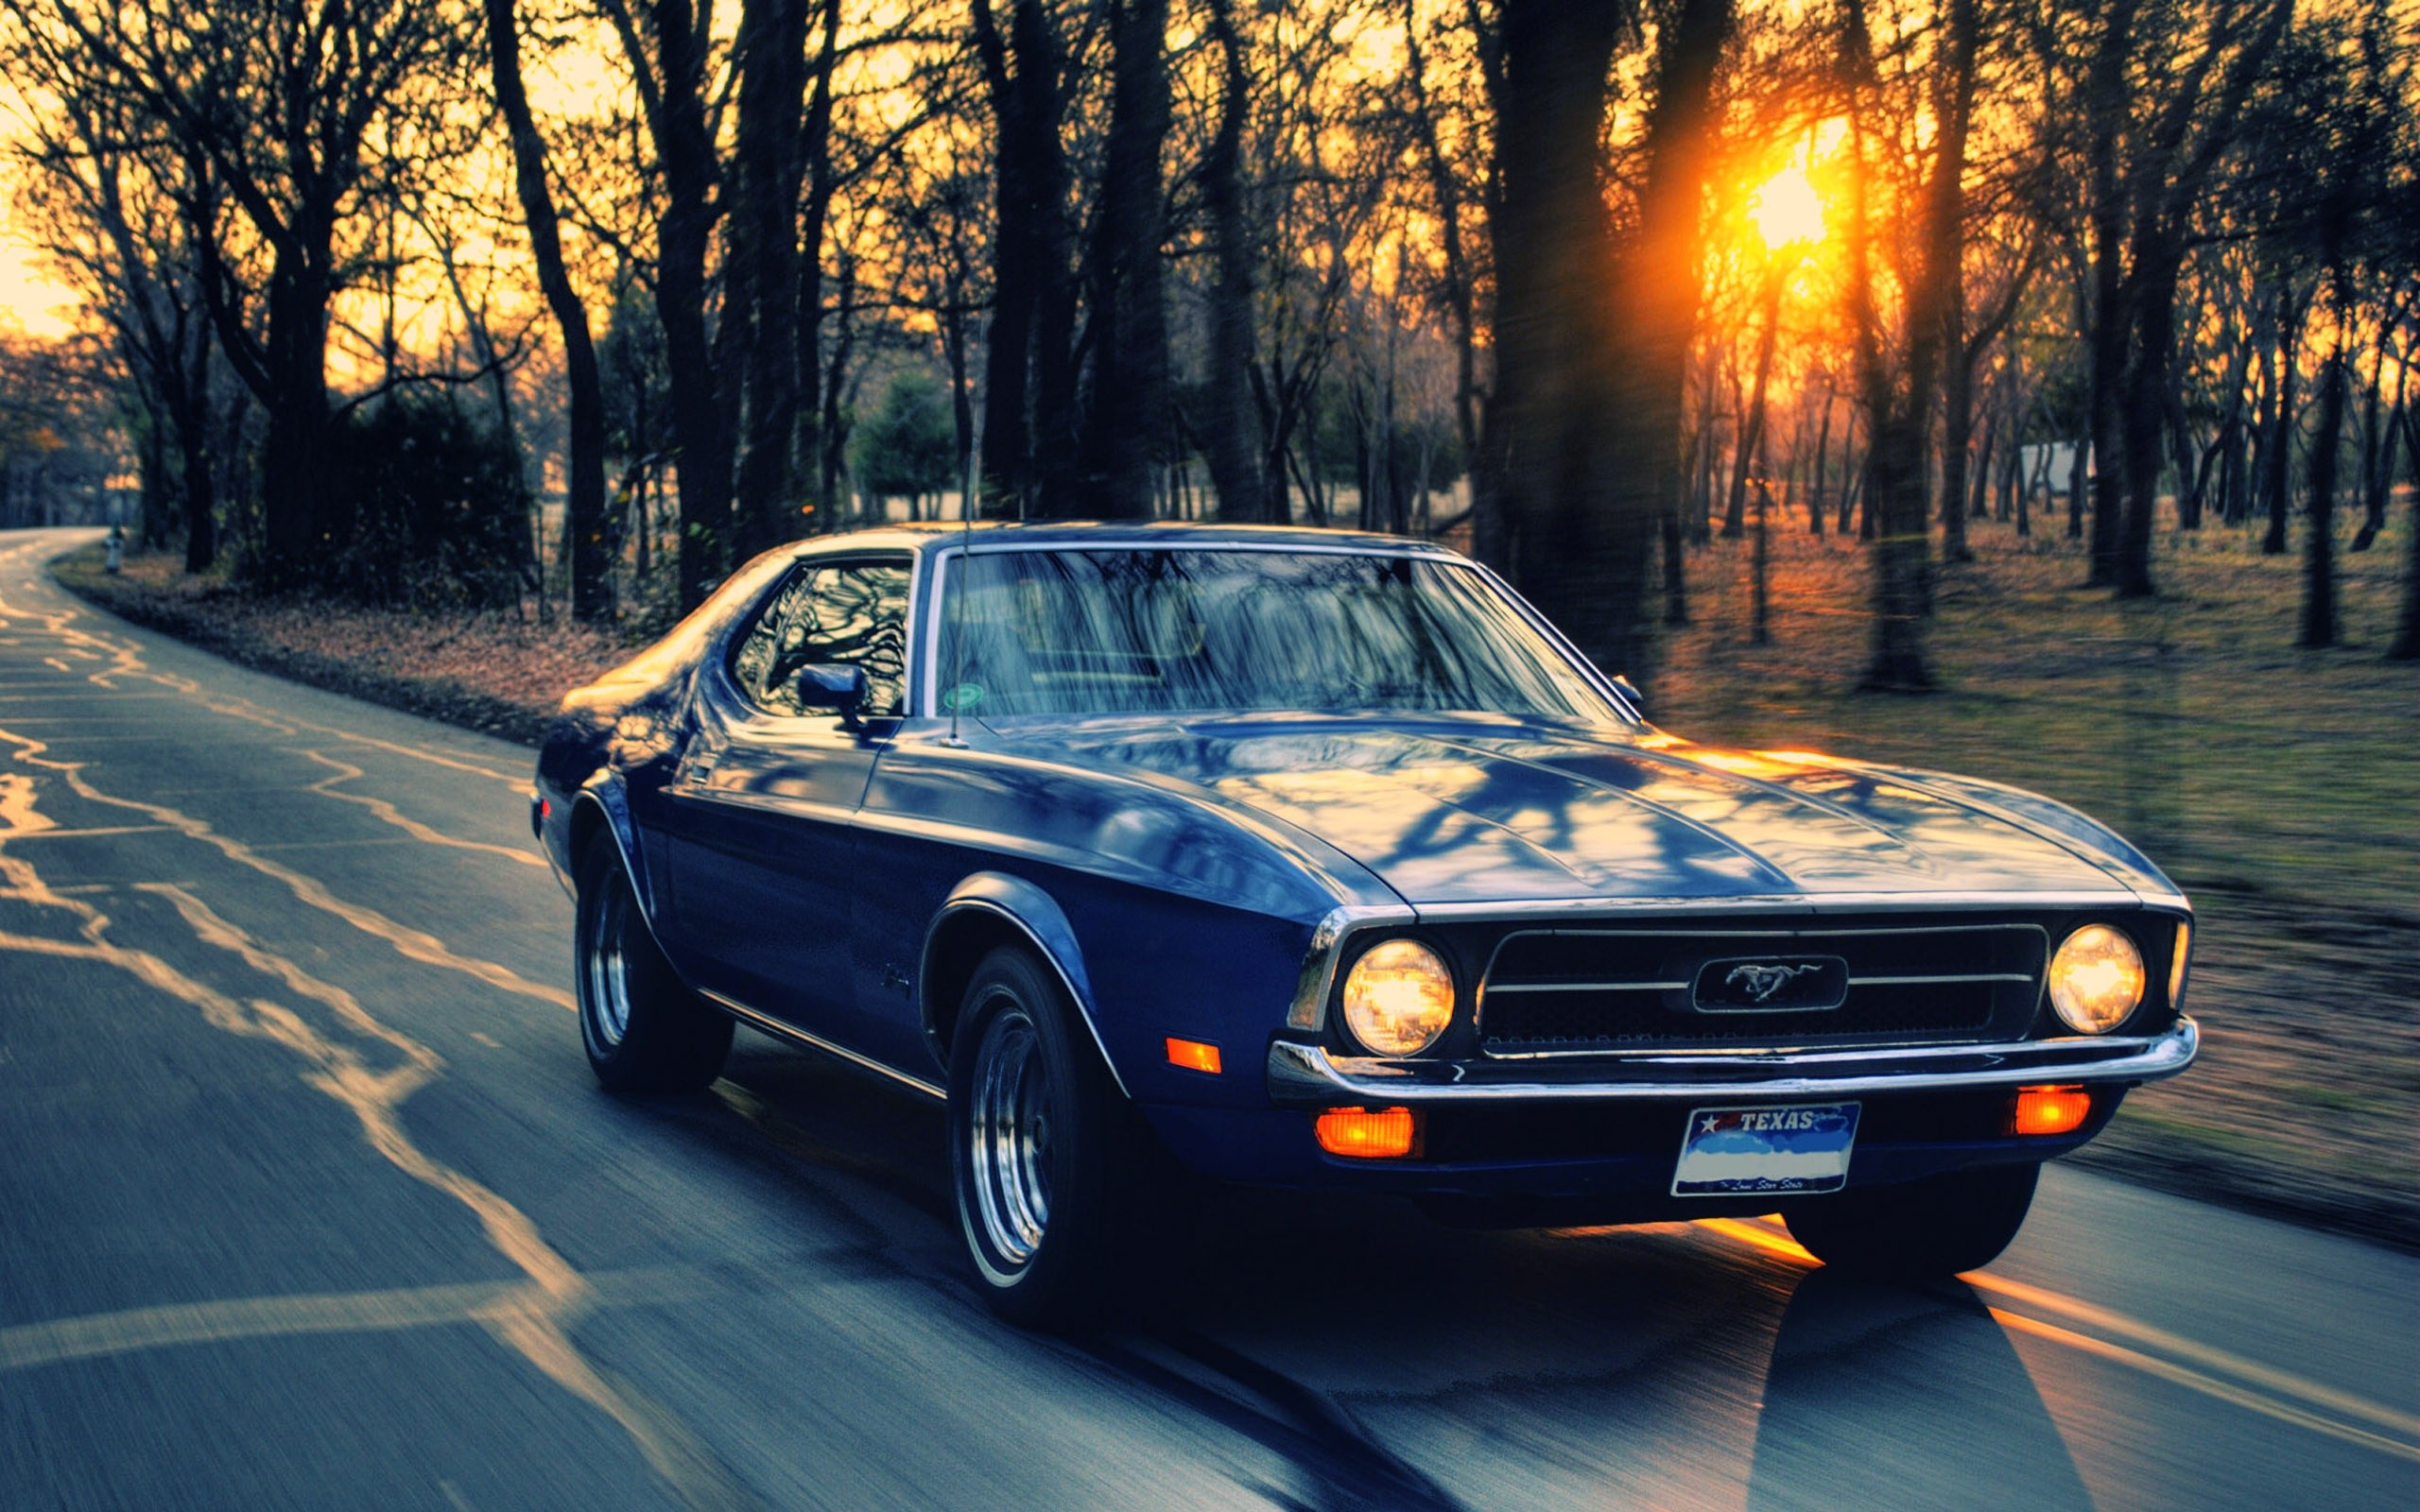 sunset, Sunrise, Trees, Ford, Roads, Ford, Mustang, Driving, Old, Cars, Feeling Wallpaper